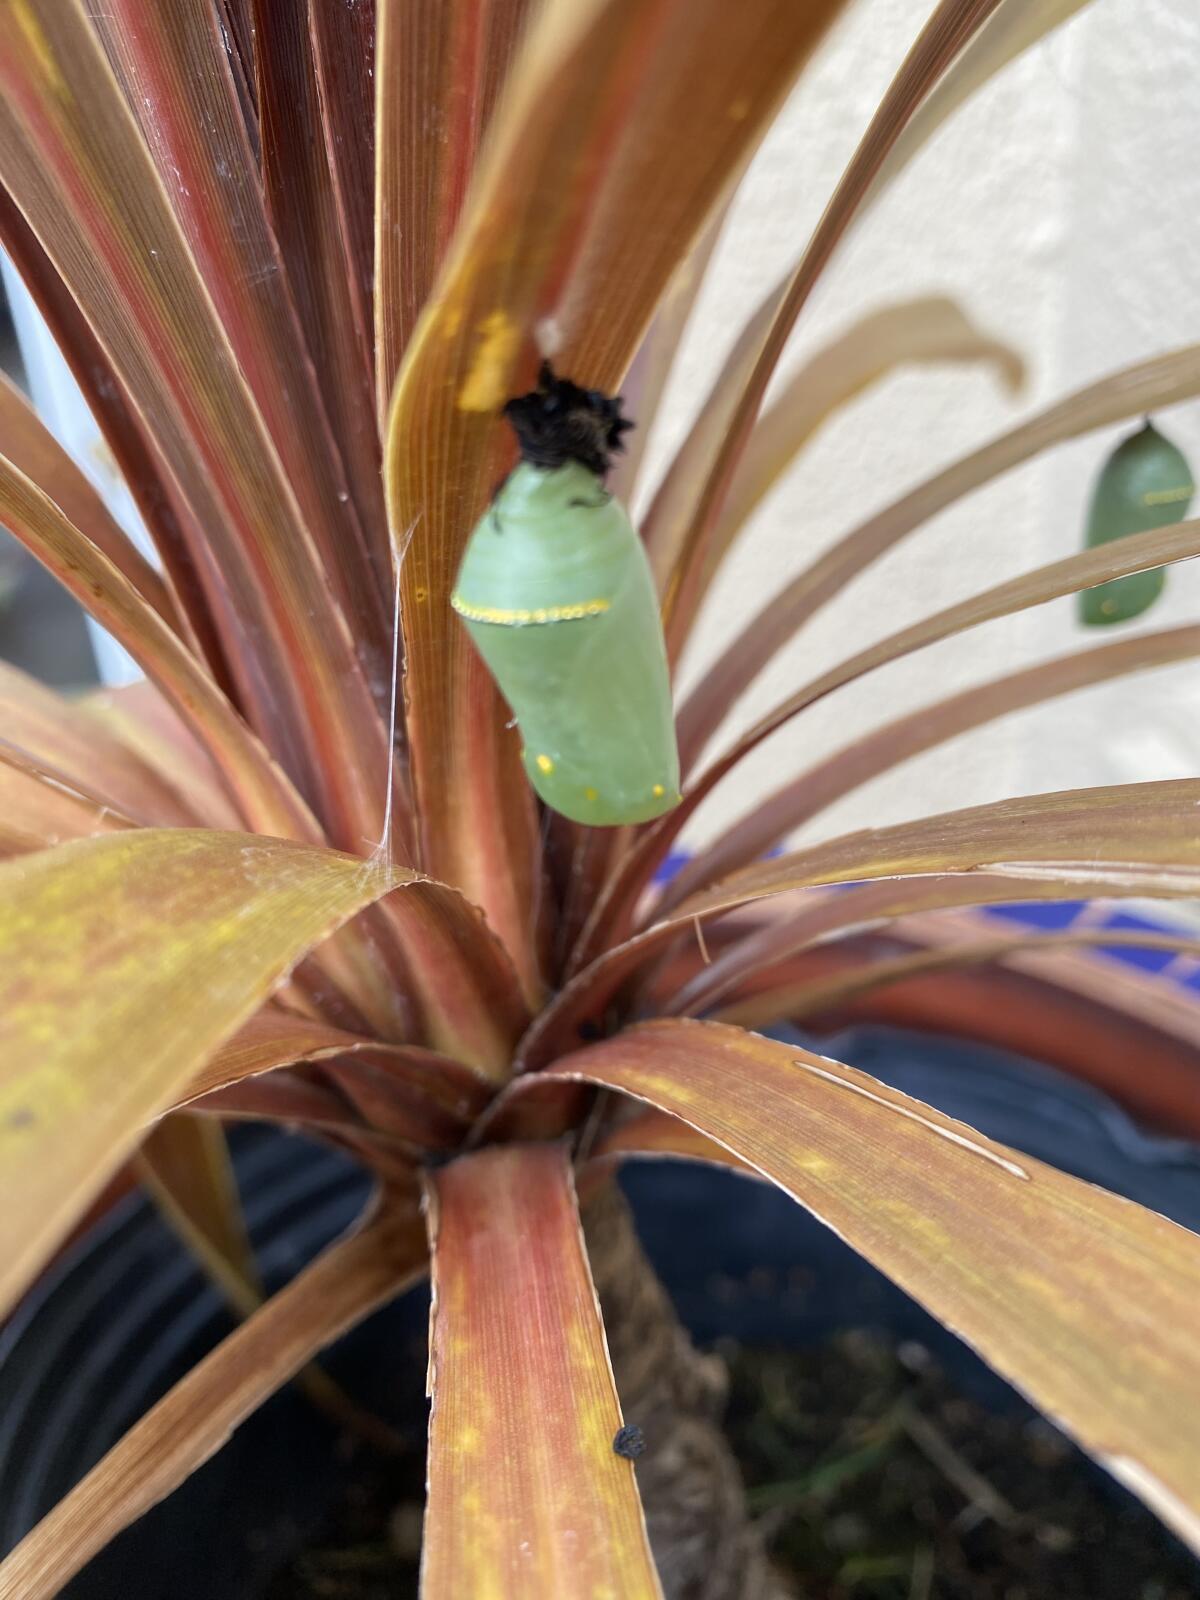 The chrysalis of a monarch butterfly hangs in Patrice Apodaca's native garden.